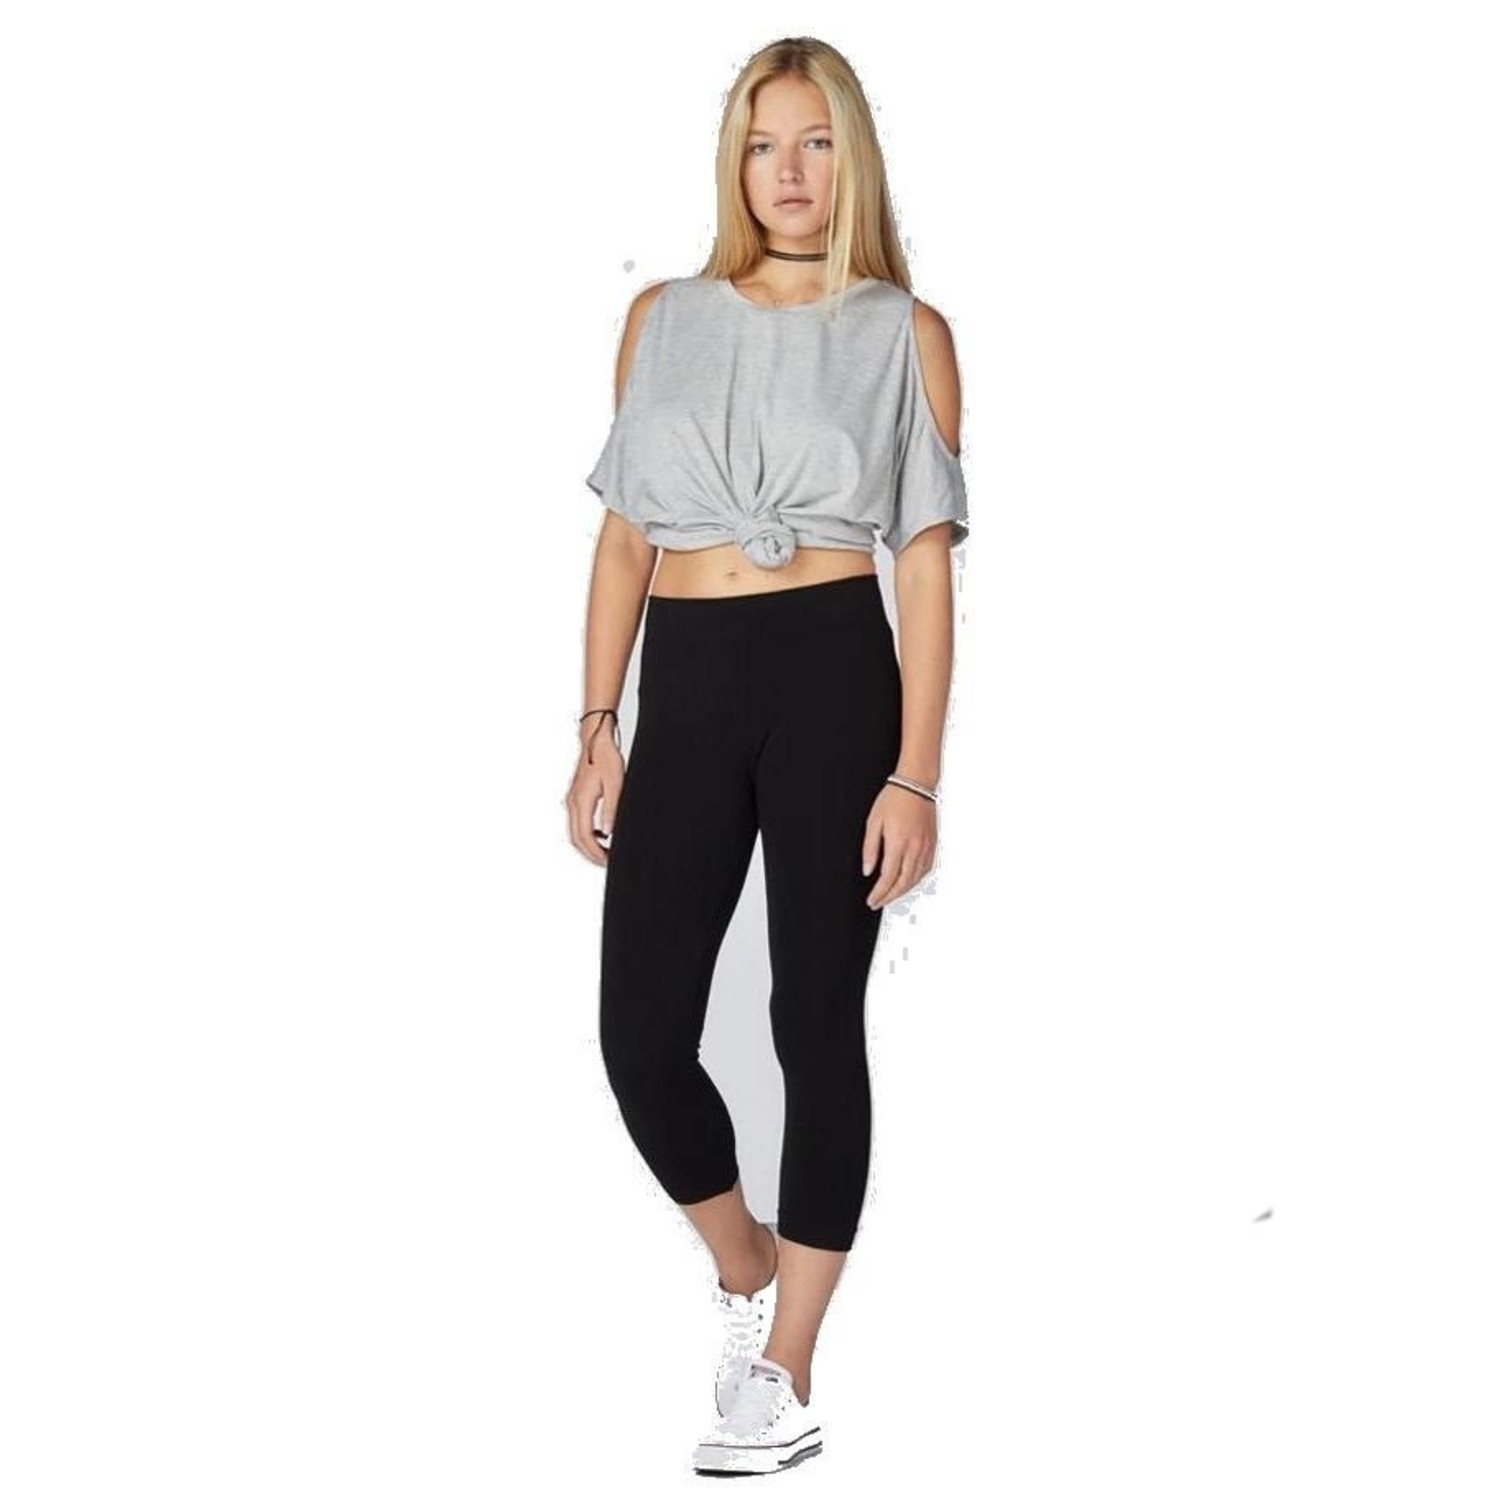 Black Bamboo Terry Leggings by So-Fine